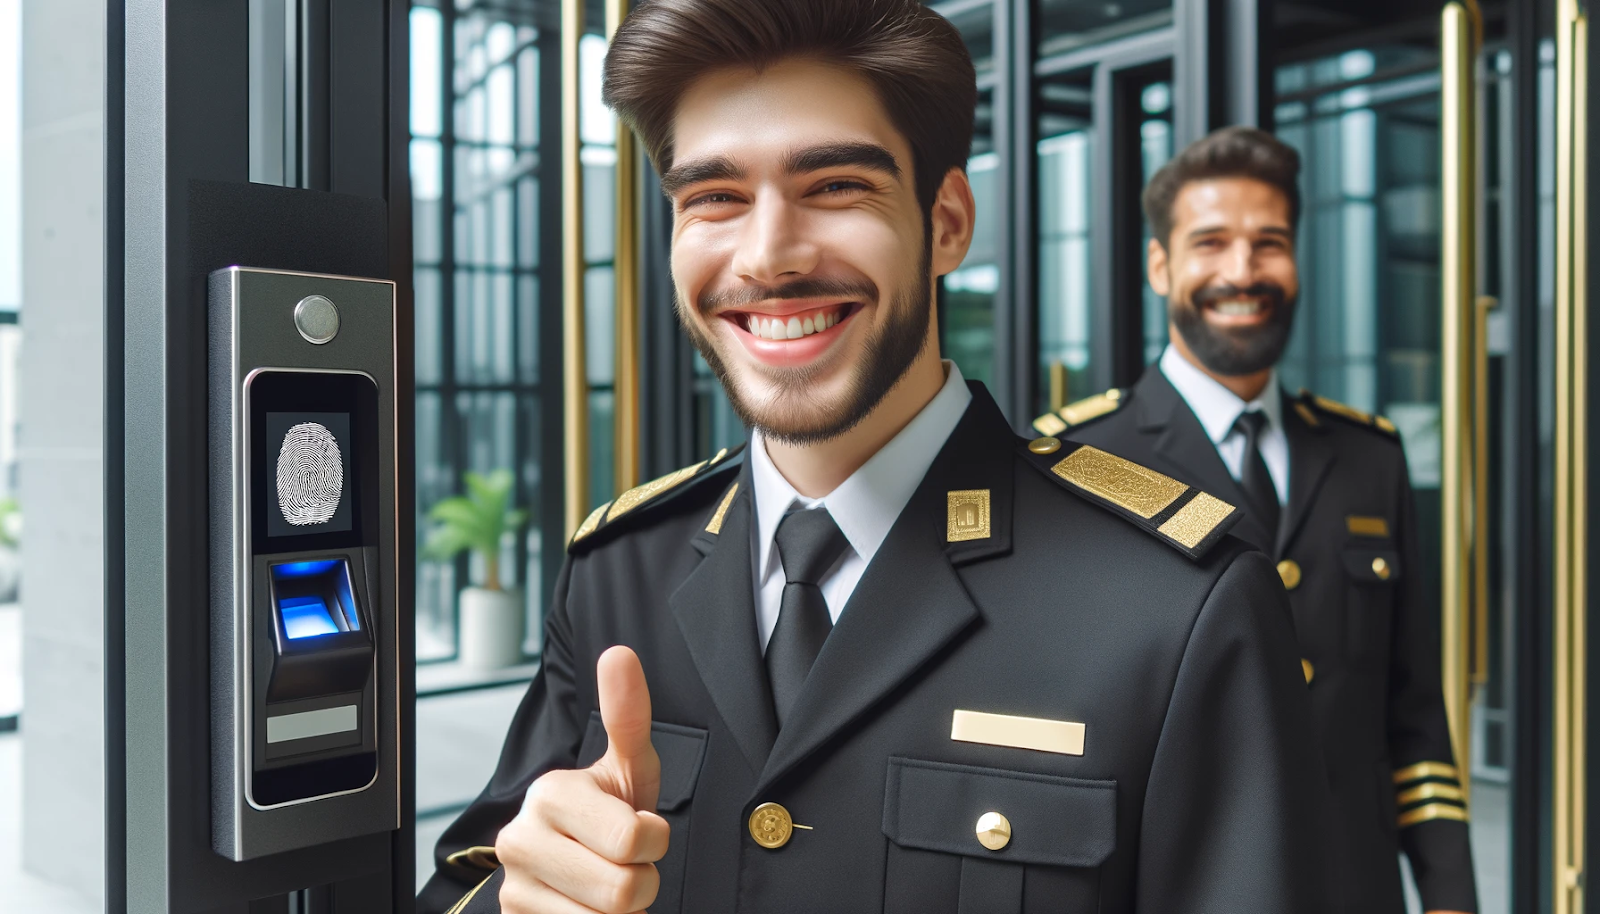 Cheerful security guard using a biometric access control system with black and gold accents, ensuring secure access.